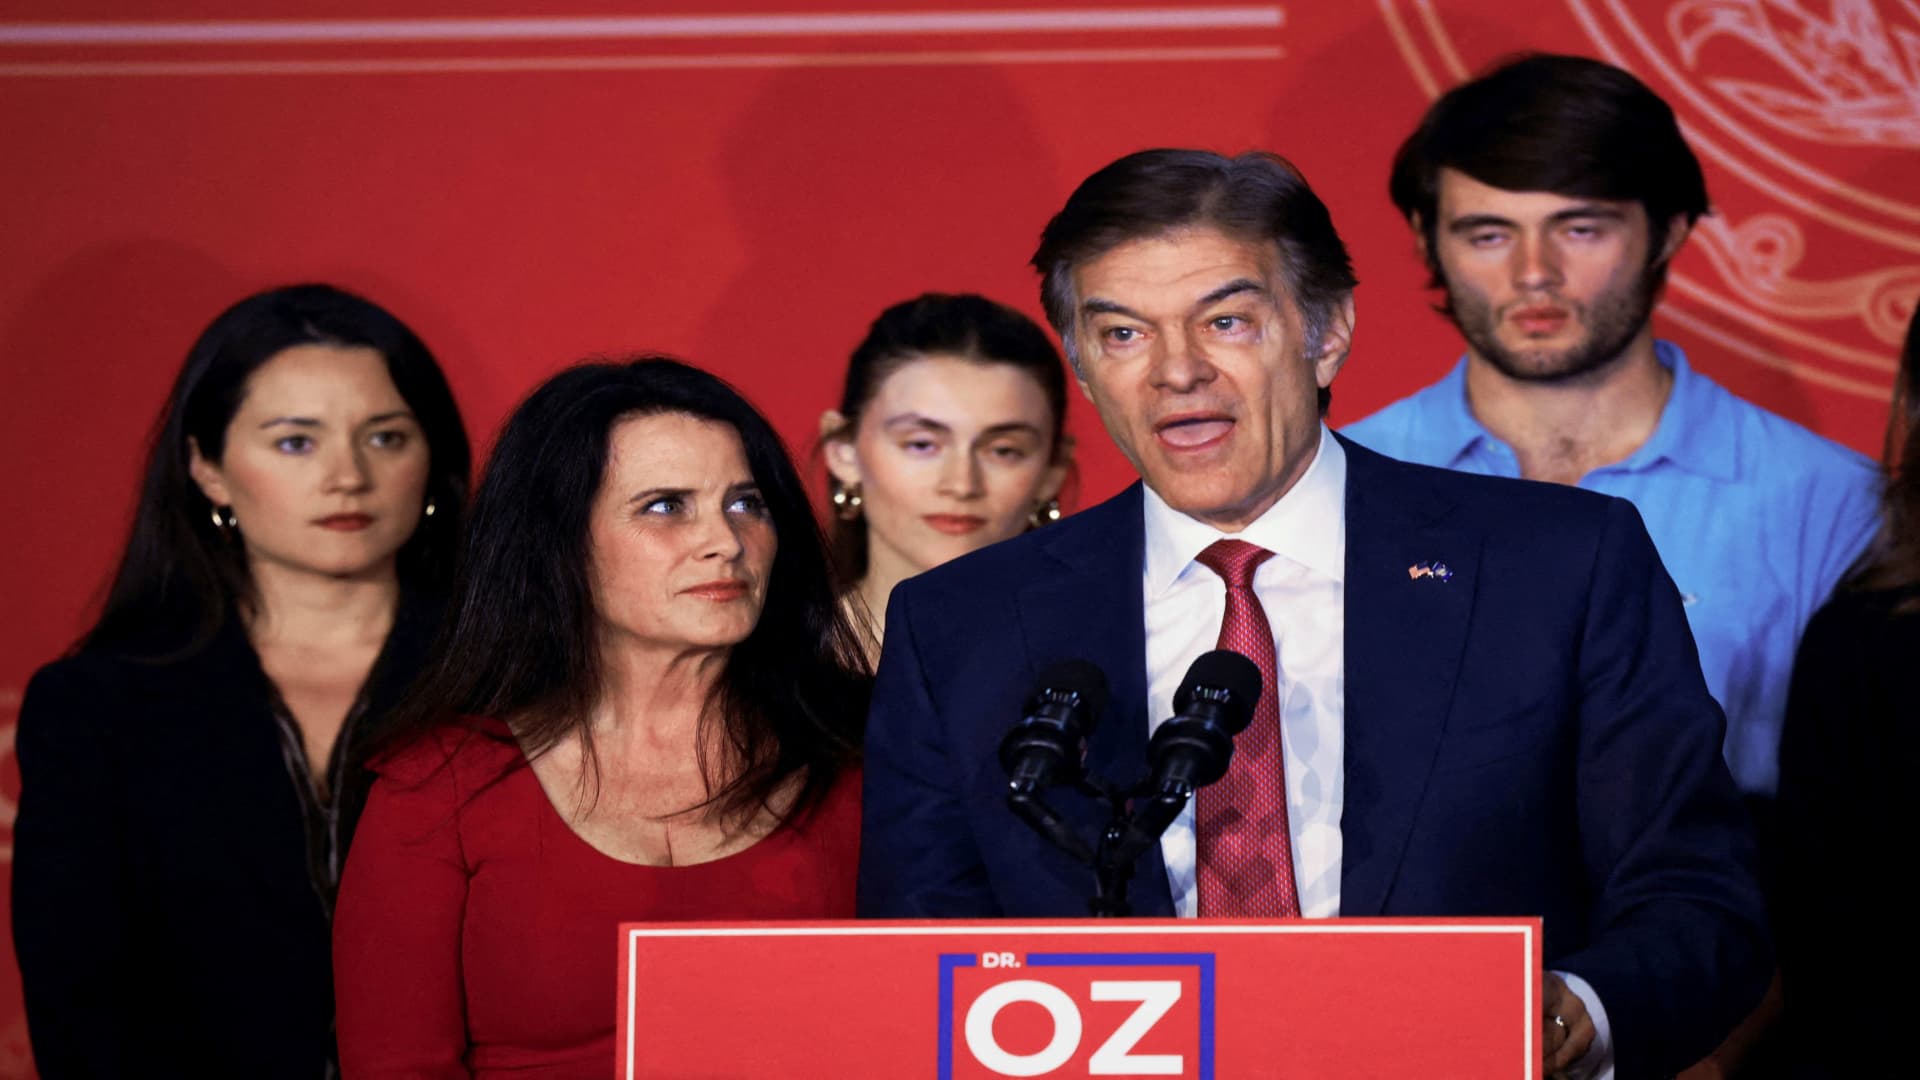 Republican Pennsylvania U.S. Senate candidate Mehmet Oz with his wife and family attend his 2022 U.S. midterm elections night party in Philadelphia, Pennsylvania, U.S., November 8, 2022. 